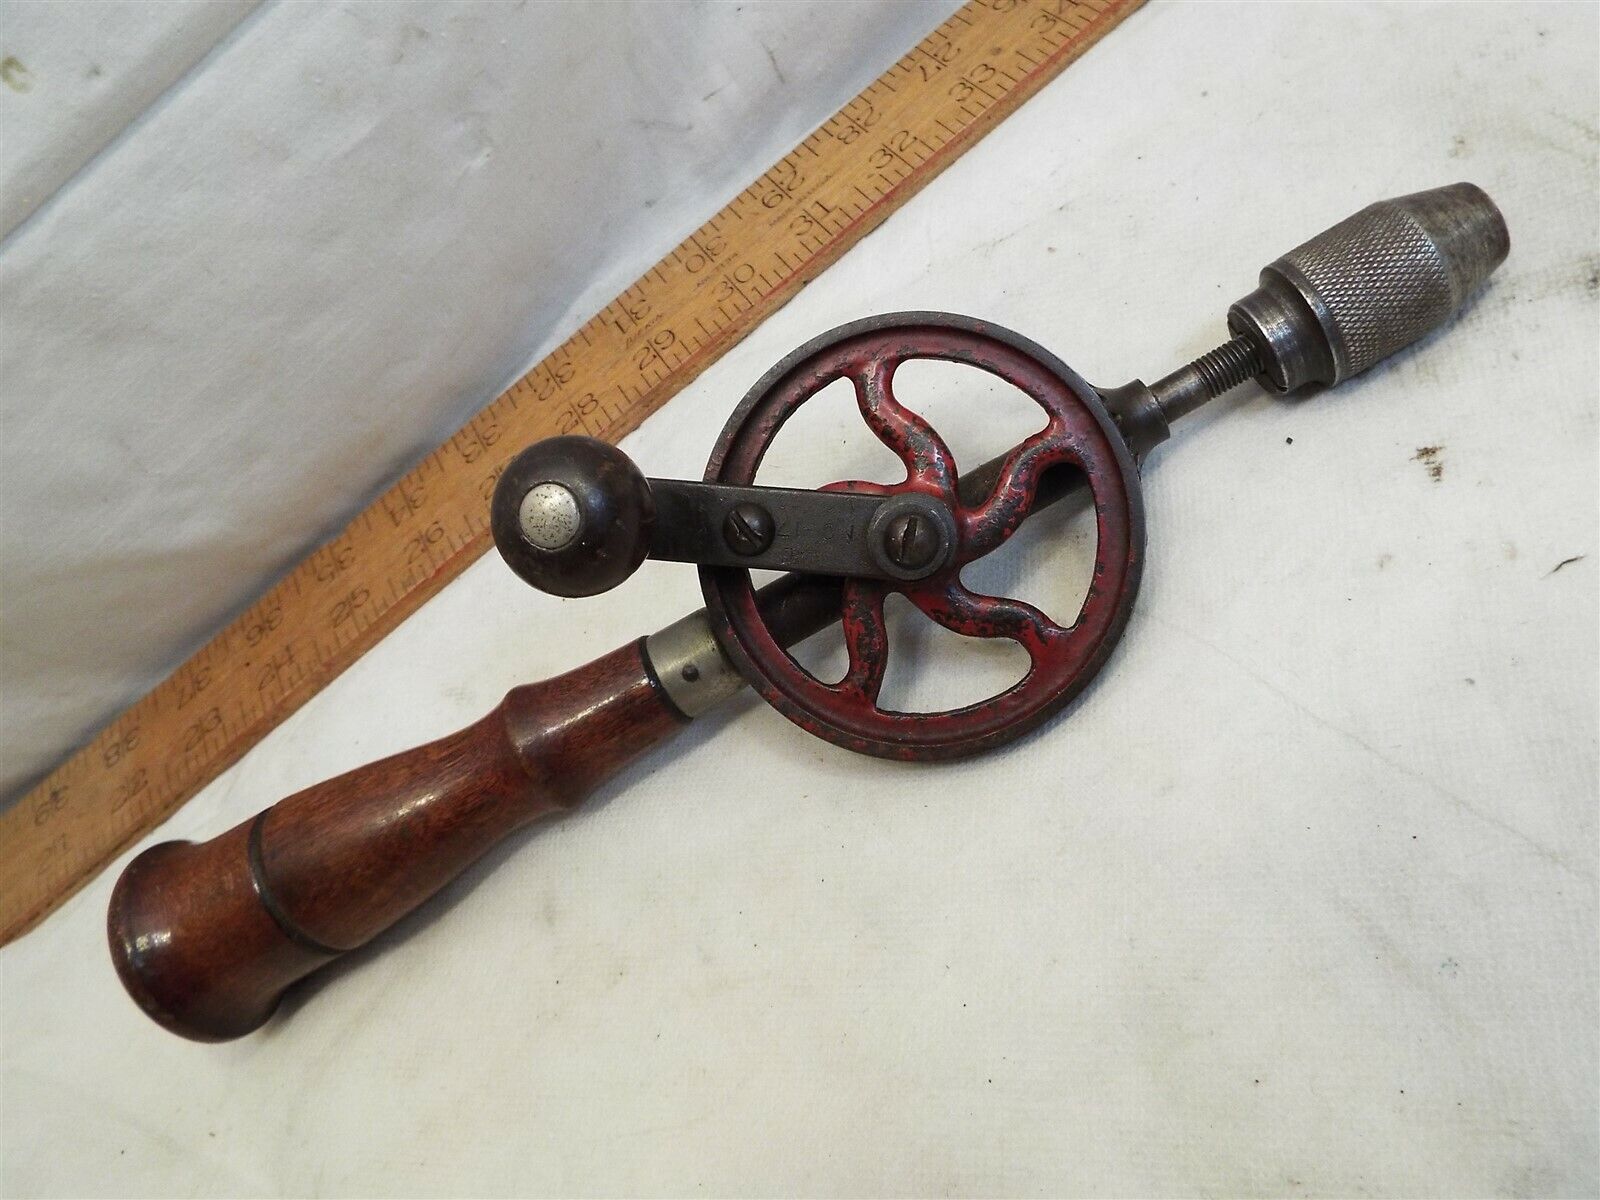 Vintage Ideal model 17 Hand Crank Drill Egg Beater Style Type